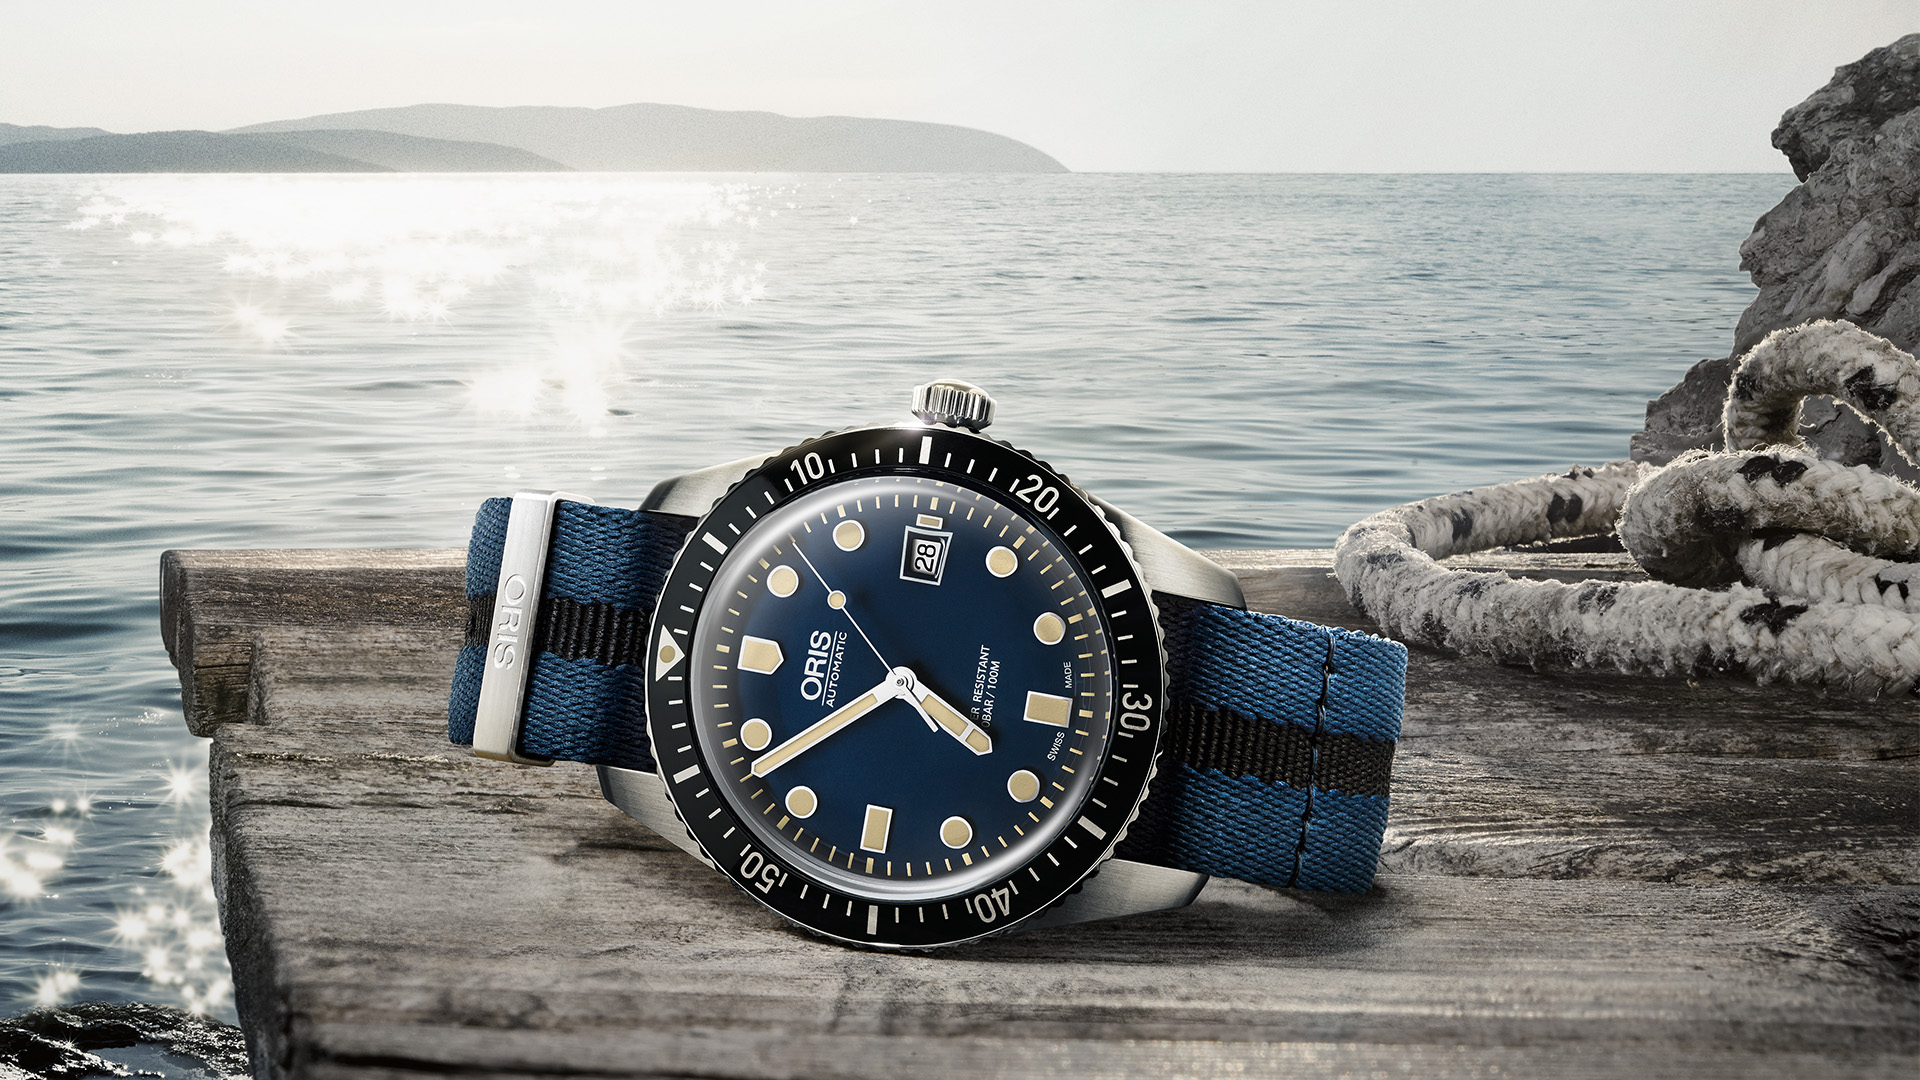 Divers Sixty-Five - Divers - Watches - 01 733 7707 4064-07 4 20 18 